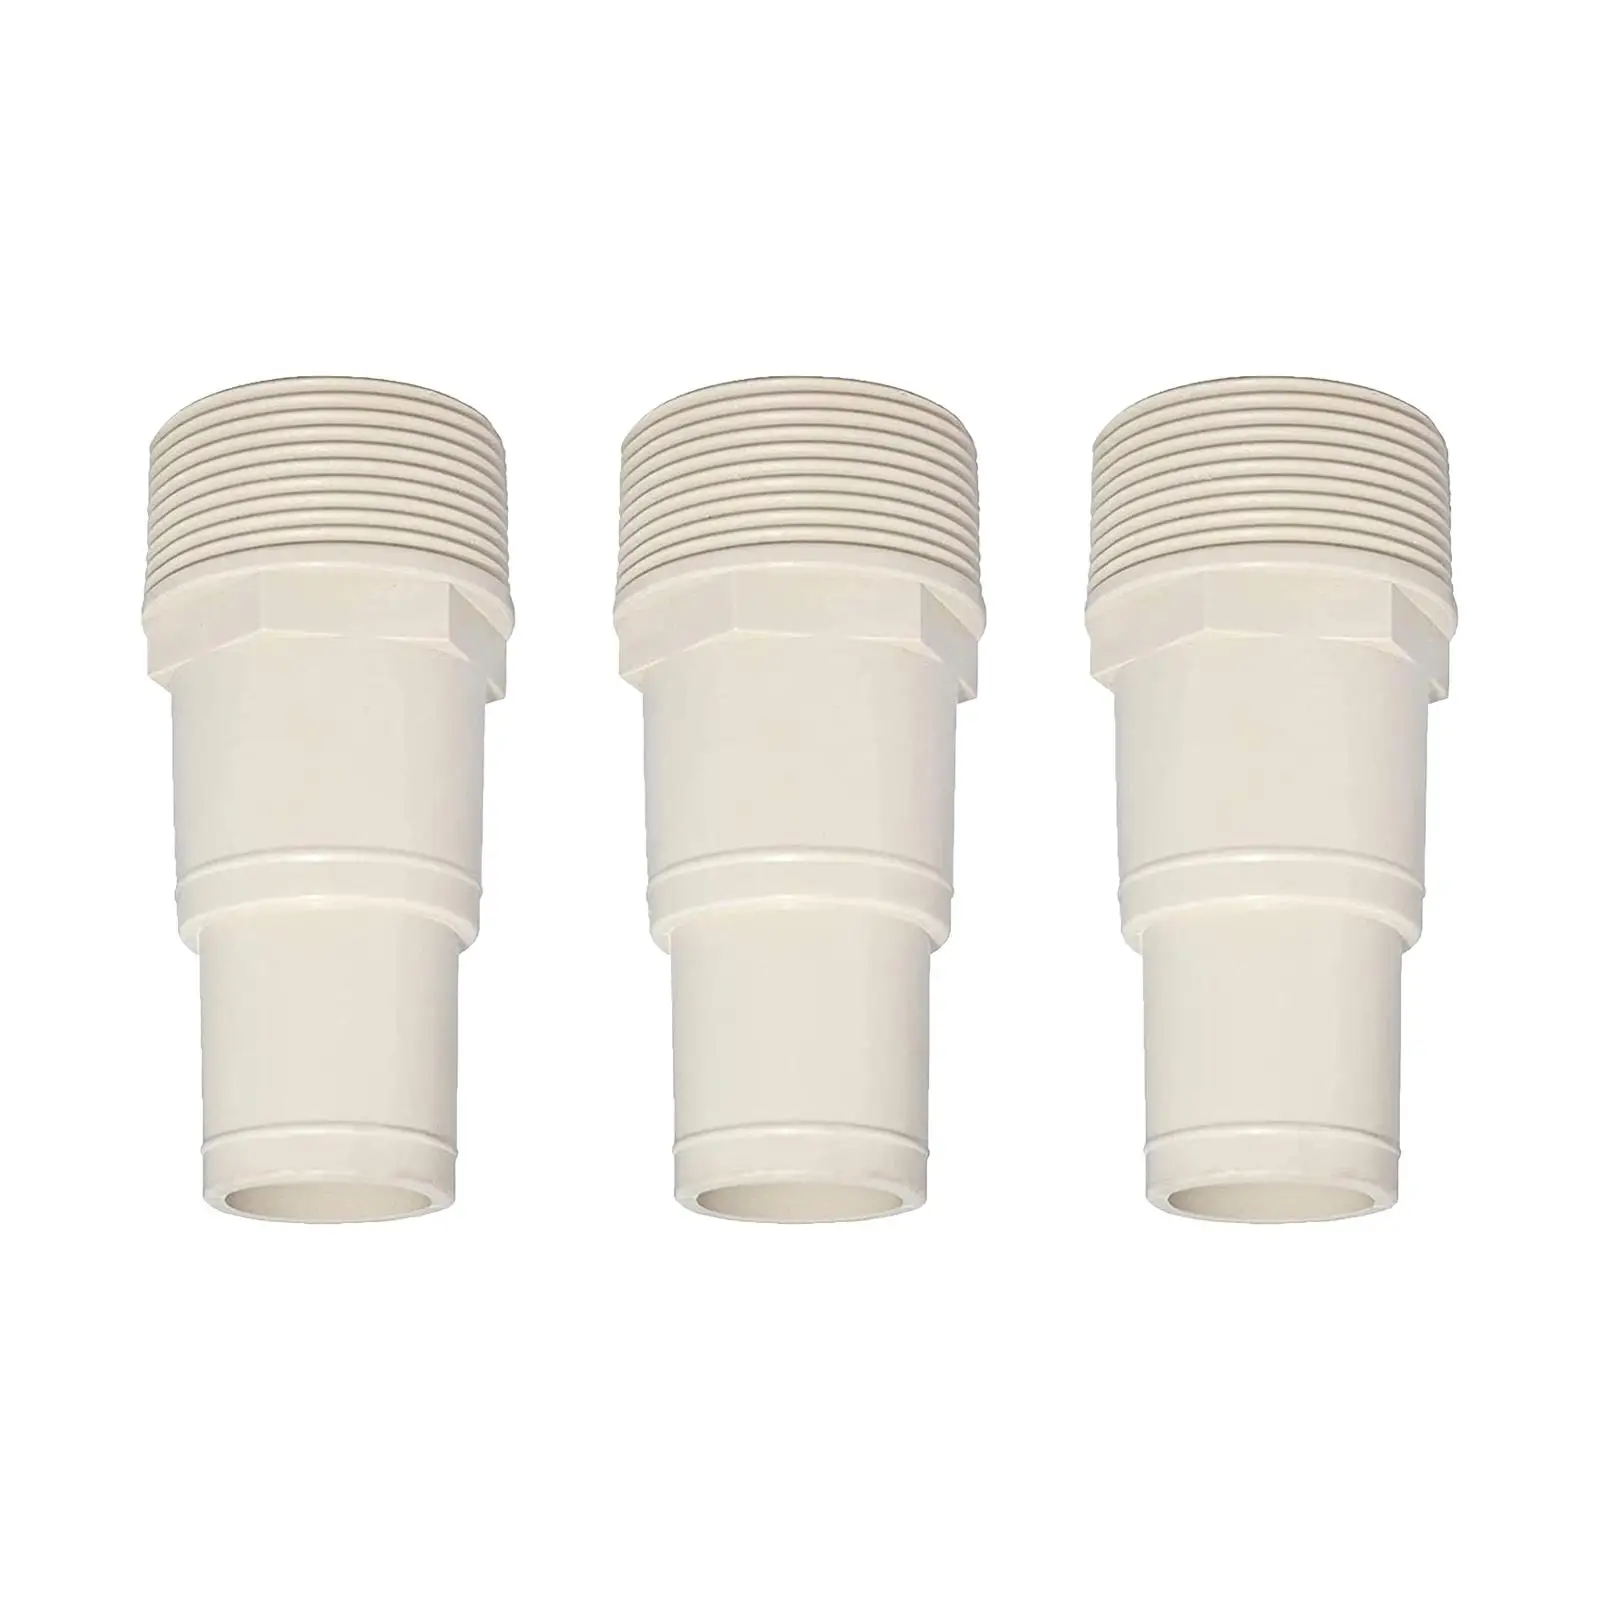 3x Pool Filter Pump Hose Adapter Universal 1.25/ 1.5 inch Combo Hose Adapter Replacement for Skimmer Plumbing Connection Filter